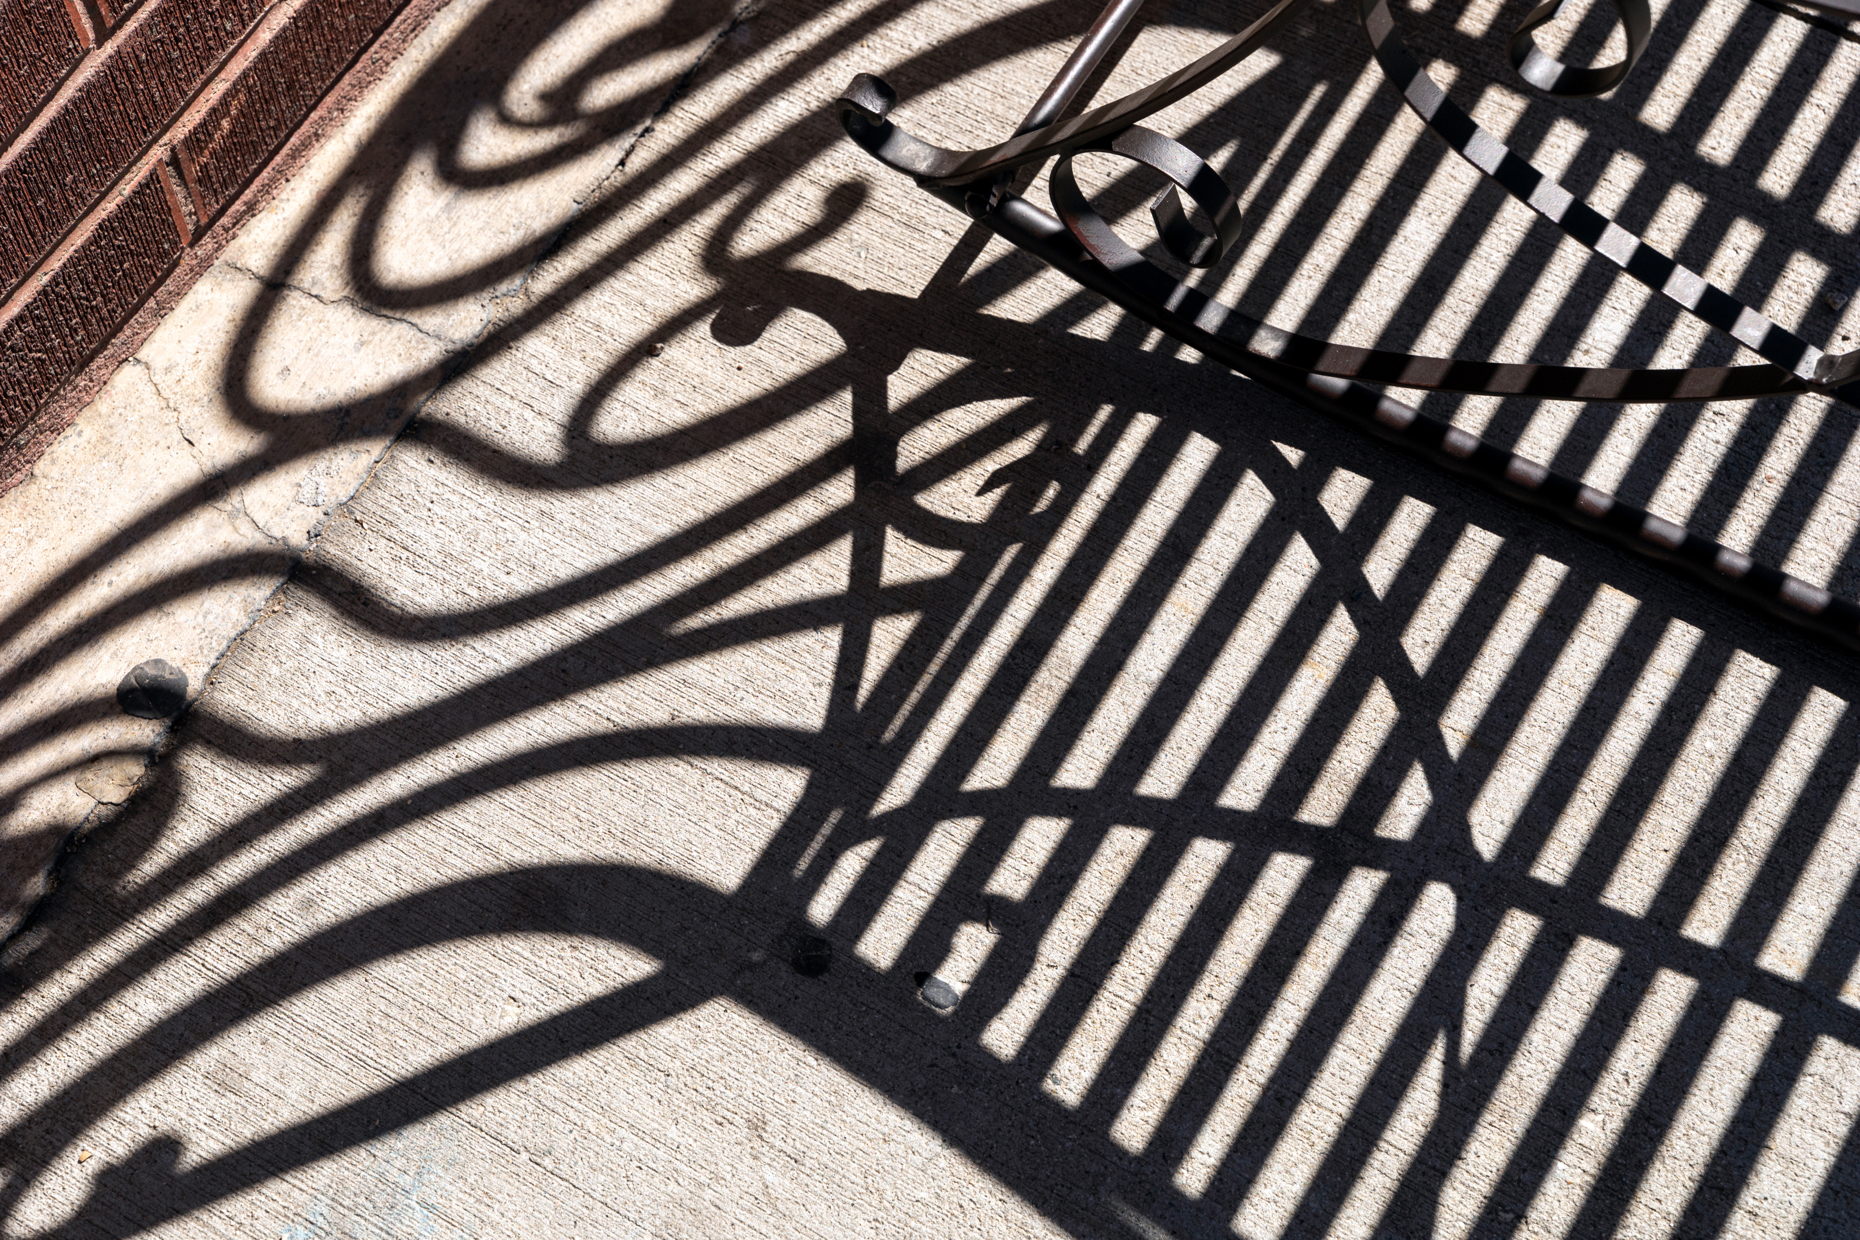 Wrought iron bench creates graphic abstract shadow patterns; Nat